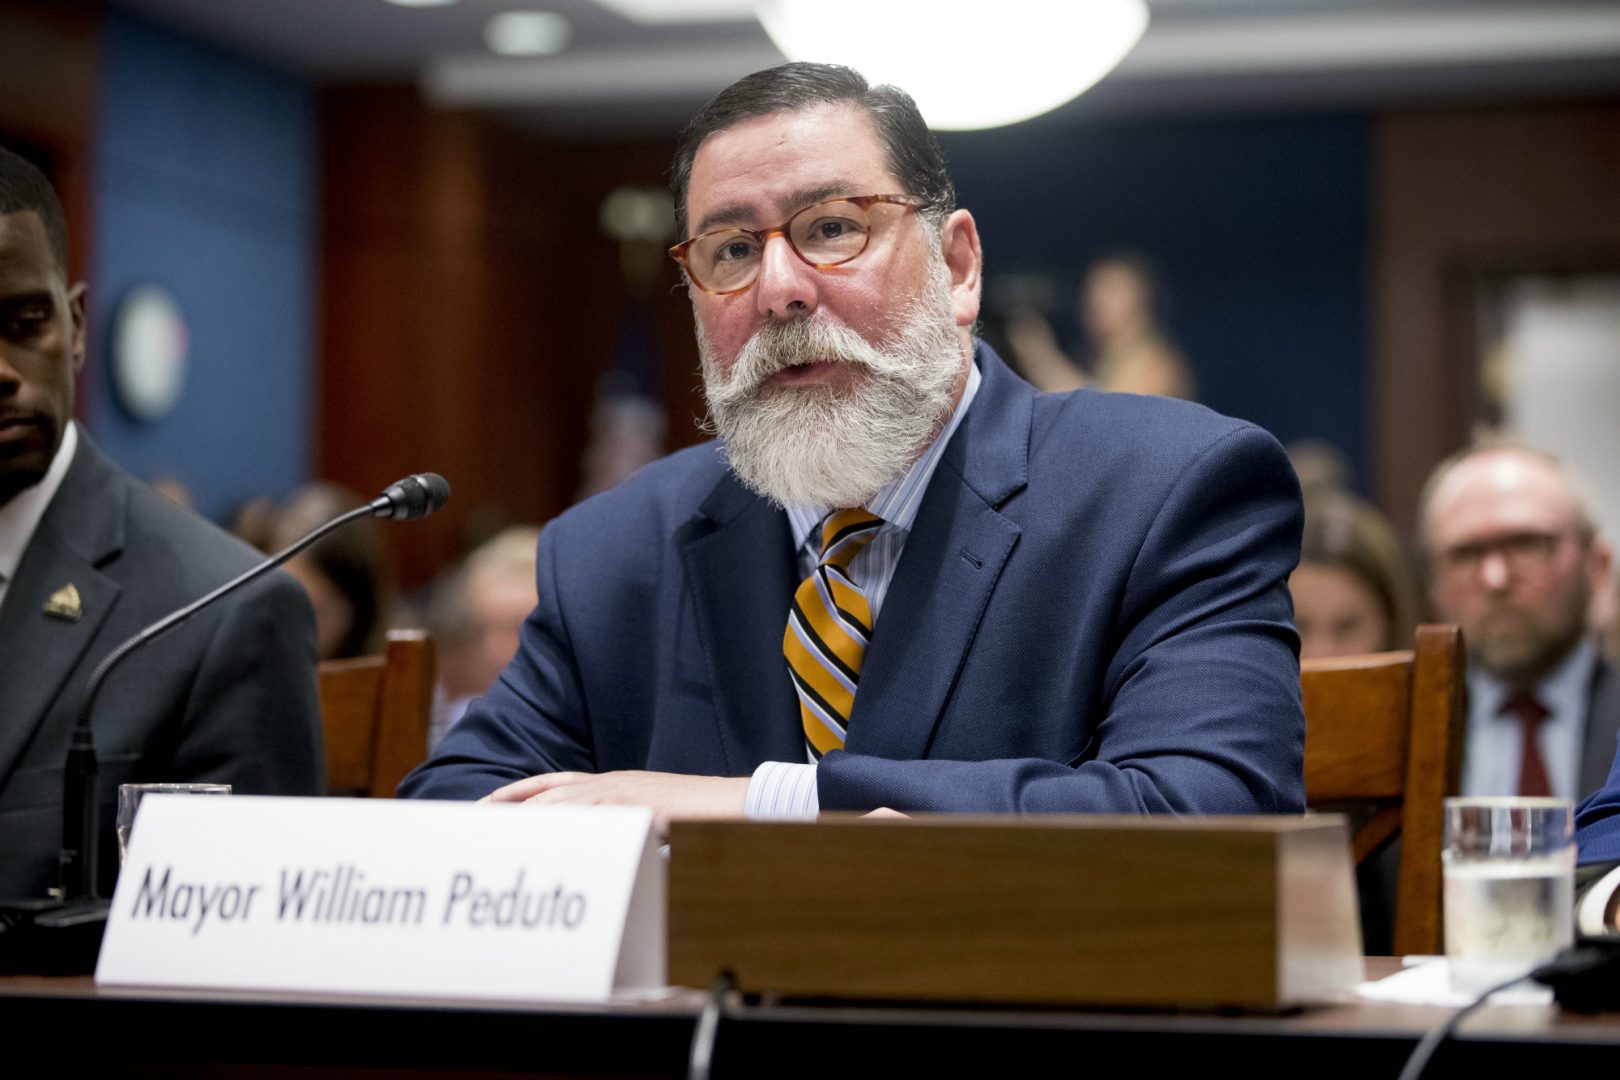 Pittsburgh Mayor Bill Peduto speaks at a Senate Democrats' Special Committee on the Climate Crisis on Capitol Hill in Washington, Wednesday, July 17, 2019. Former New York City mayor Michael Bloomberg is courting Peduto's endorsement in the Democratic presidential primary. (AP Photo/Andrew Harnik)